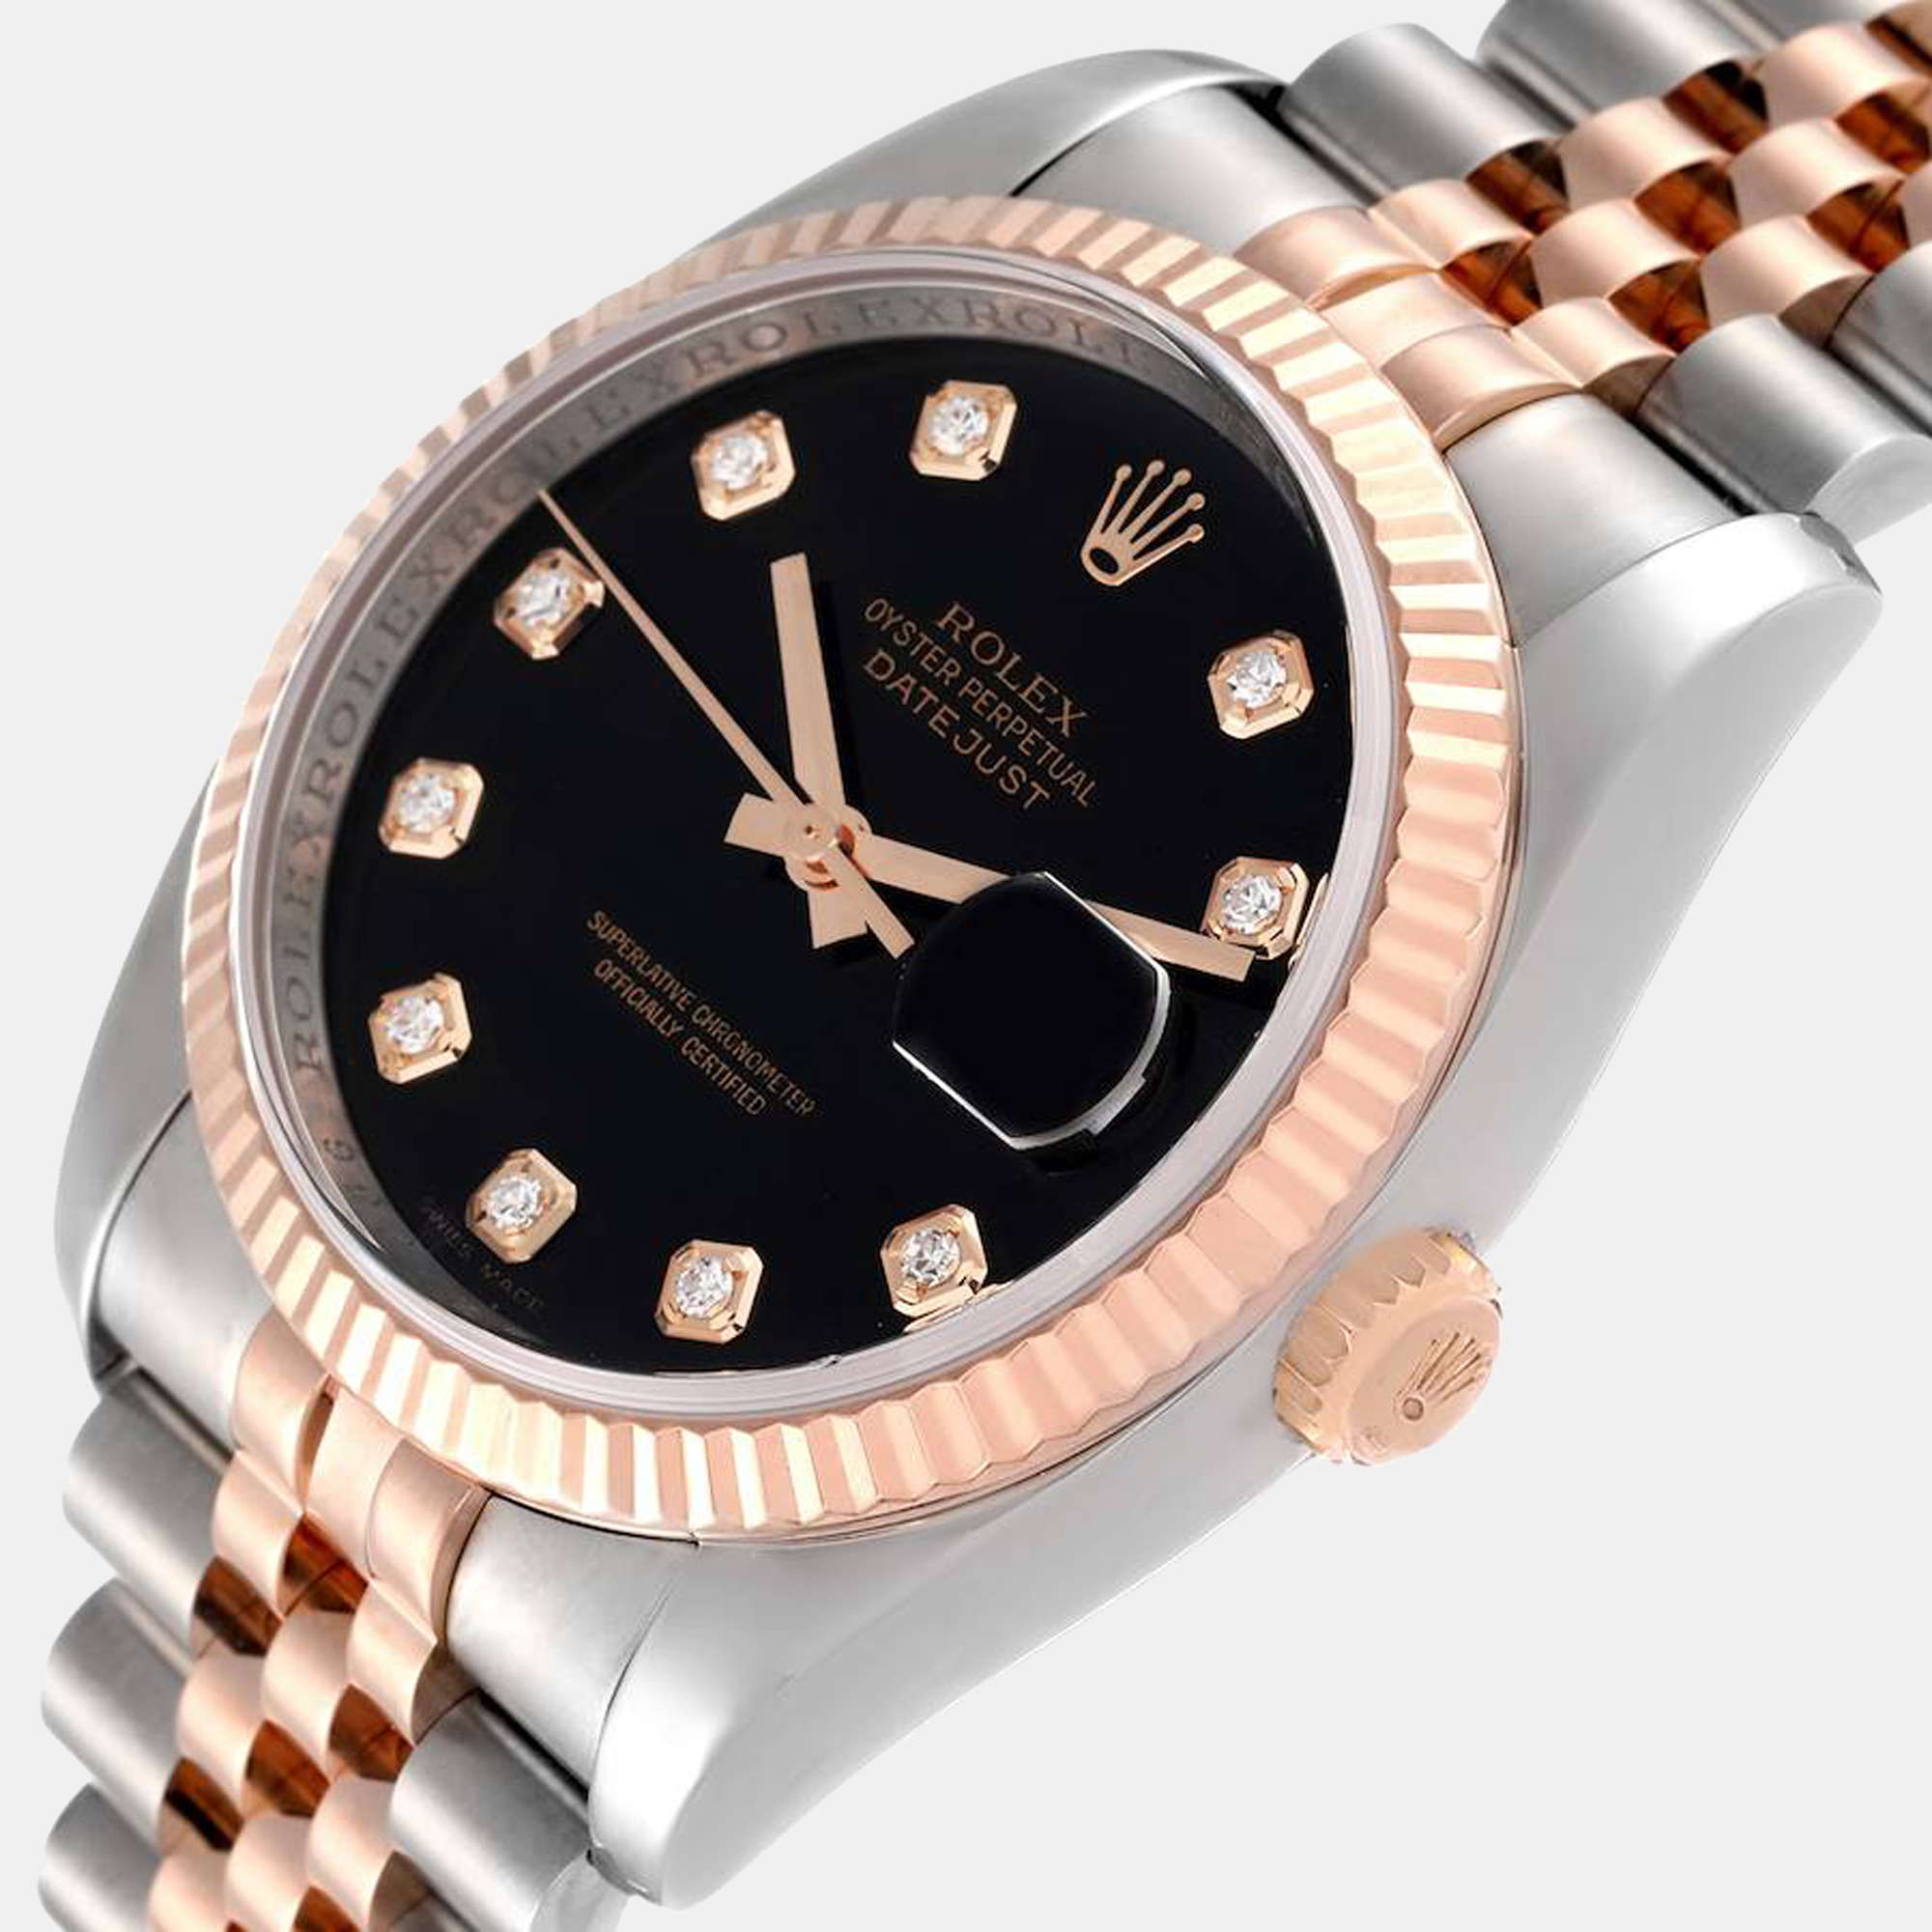 

Rolex Black Diamonds 18K Rose Gold And Stainless Steel Datejust 116231 Automatic Men's Wristwatch 36 mm